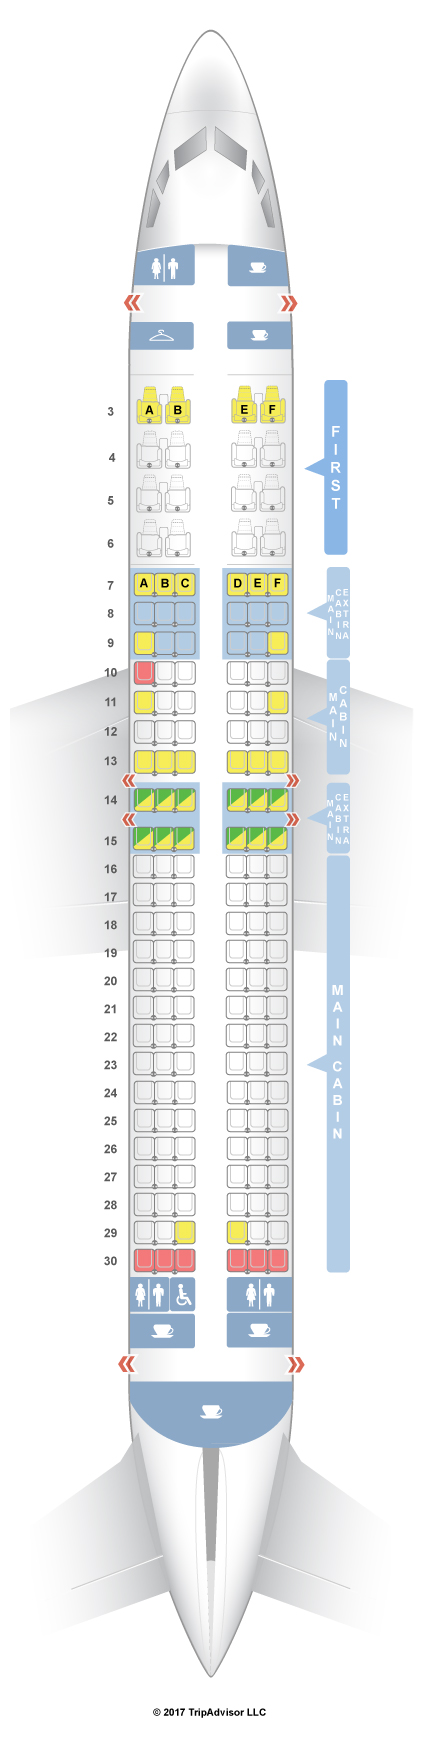 american airlines seating chart with rows